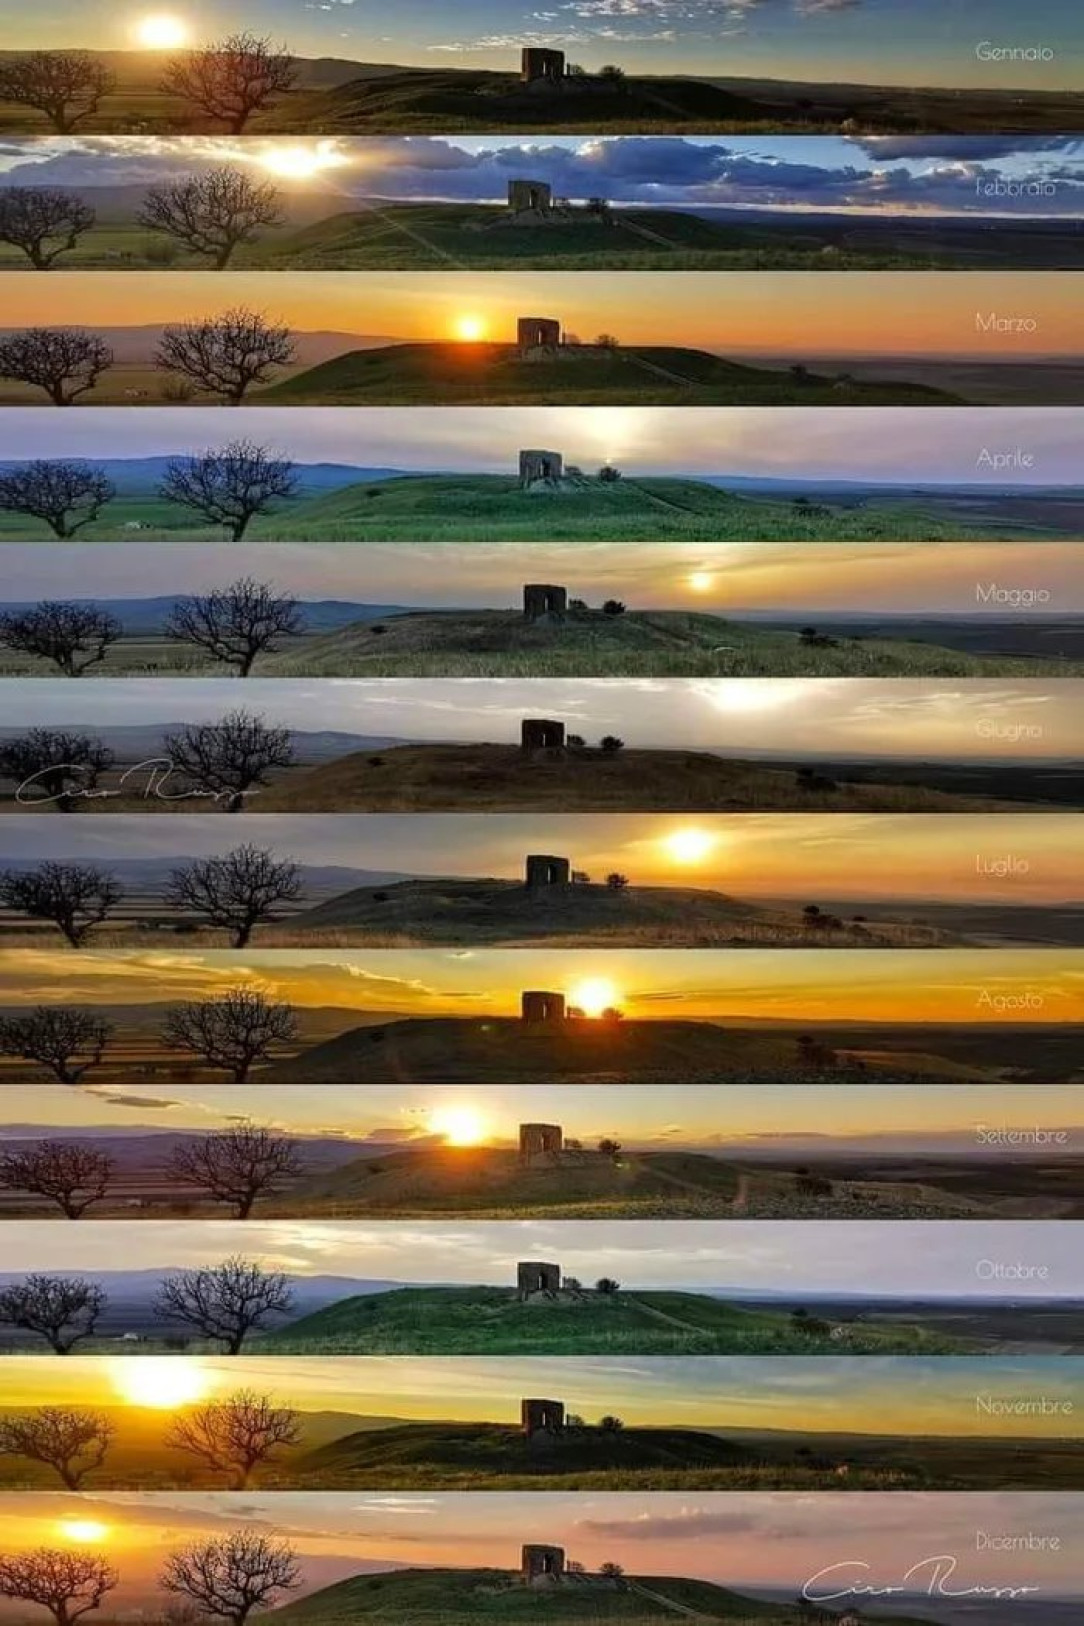 12 pictures of the sun, each month, same place and same time